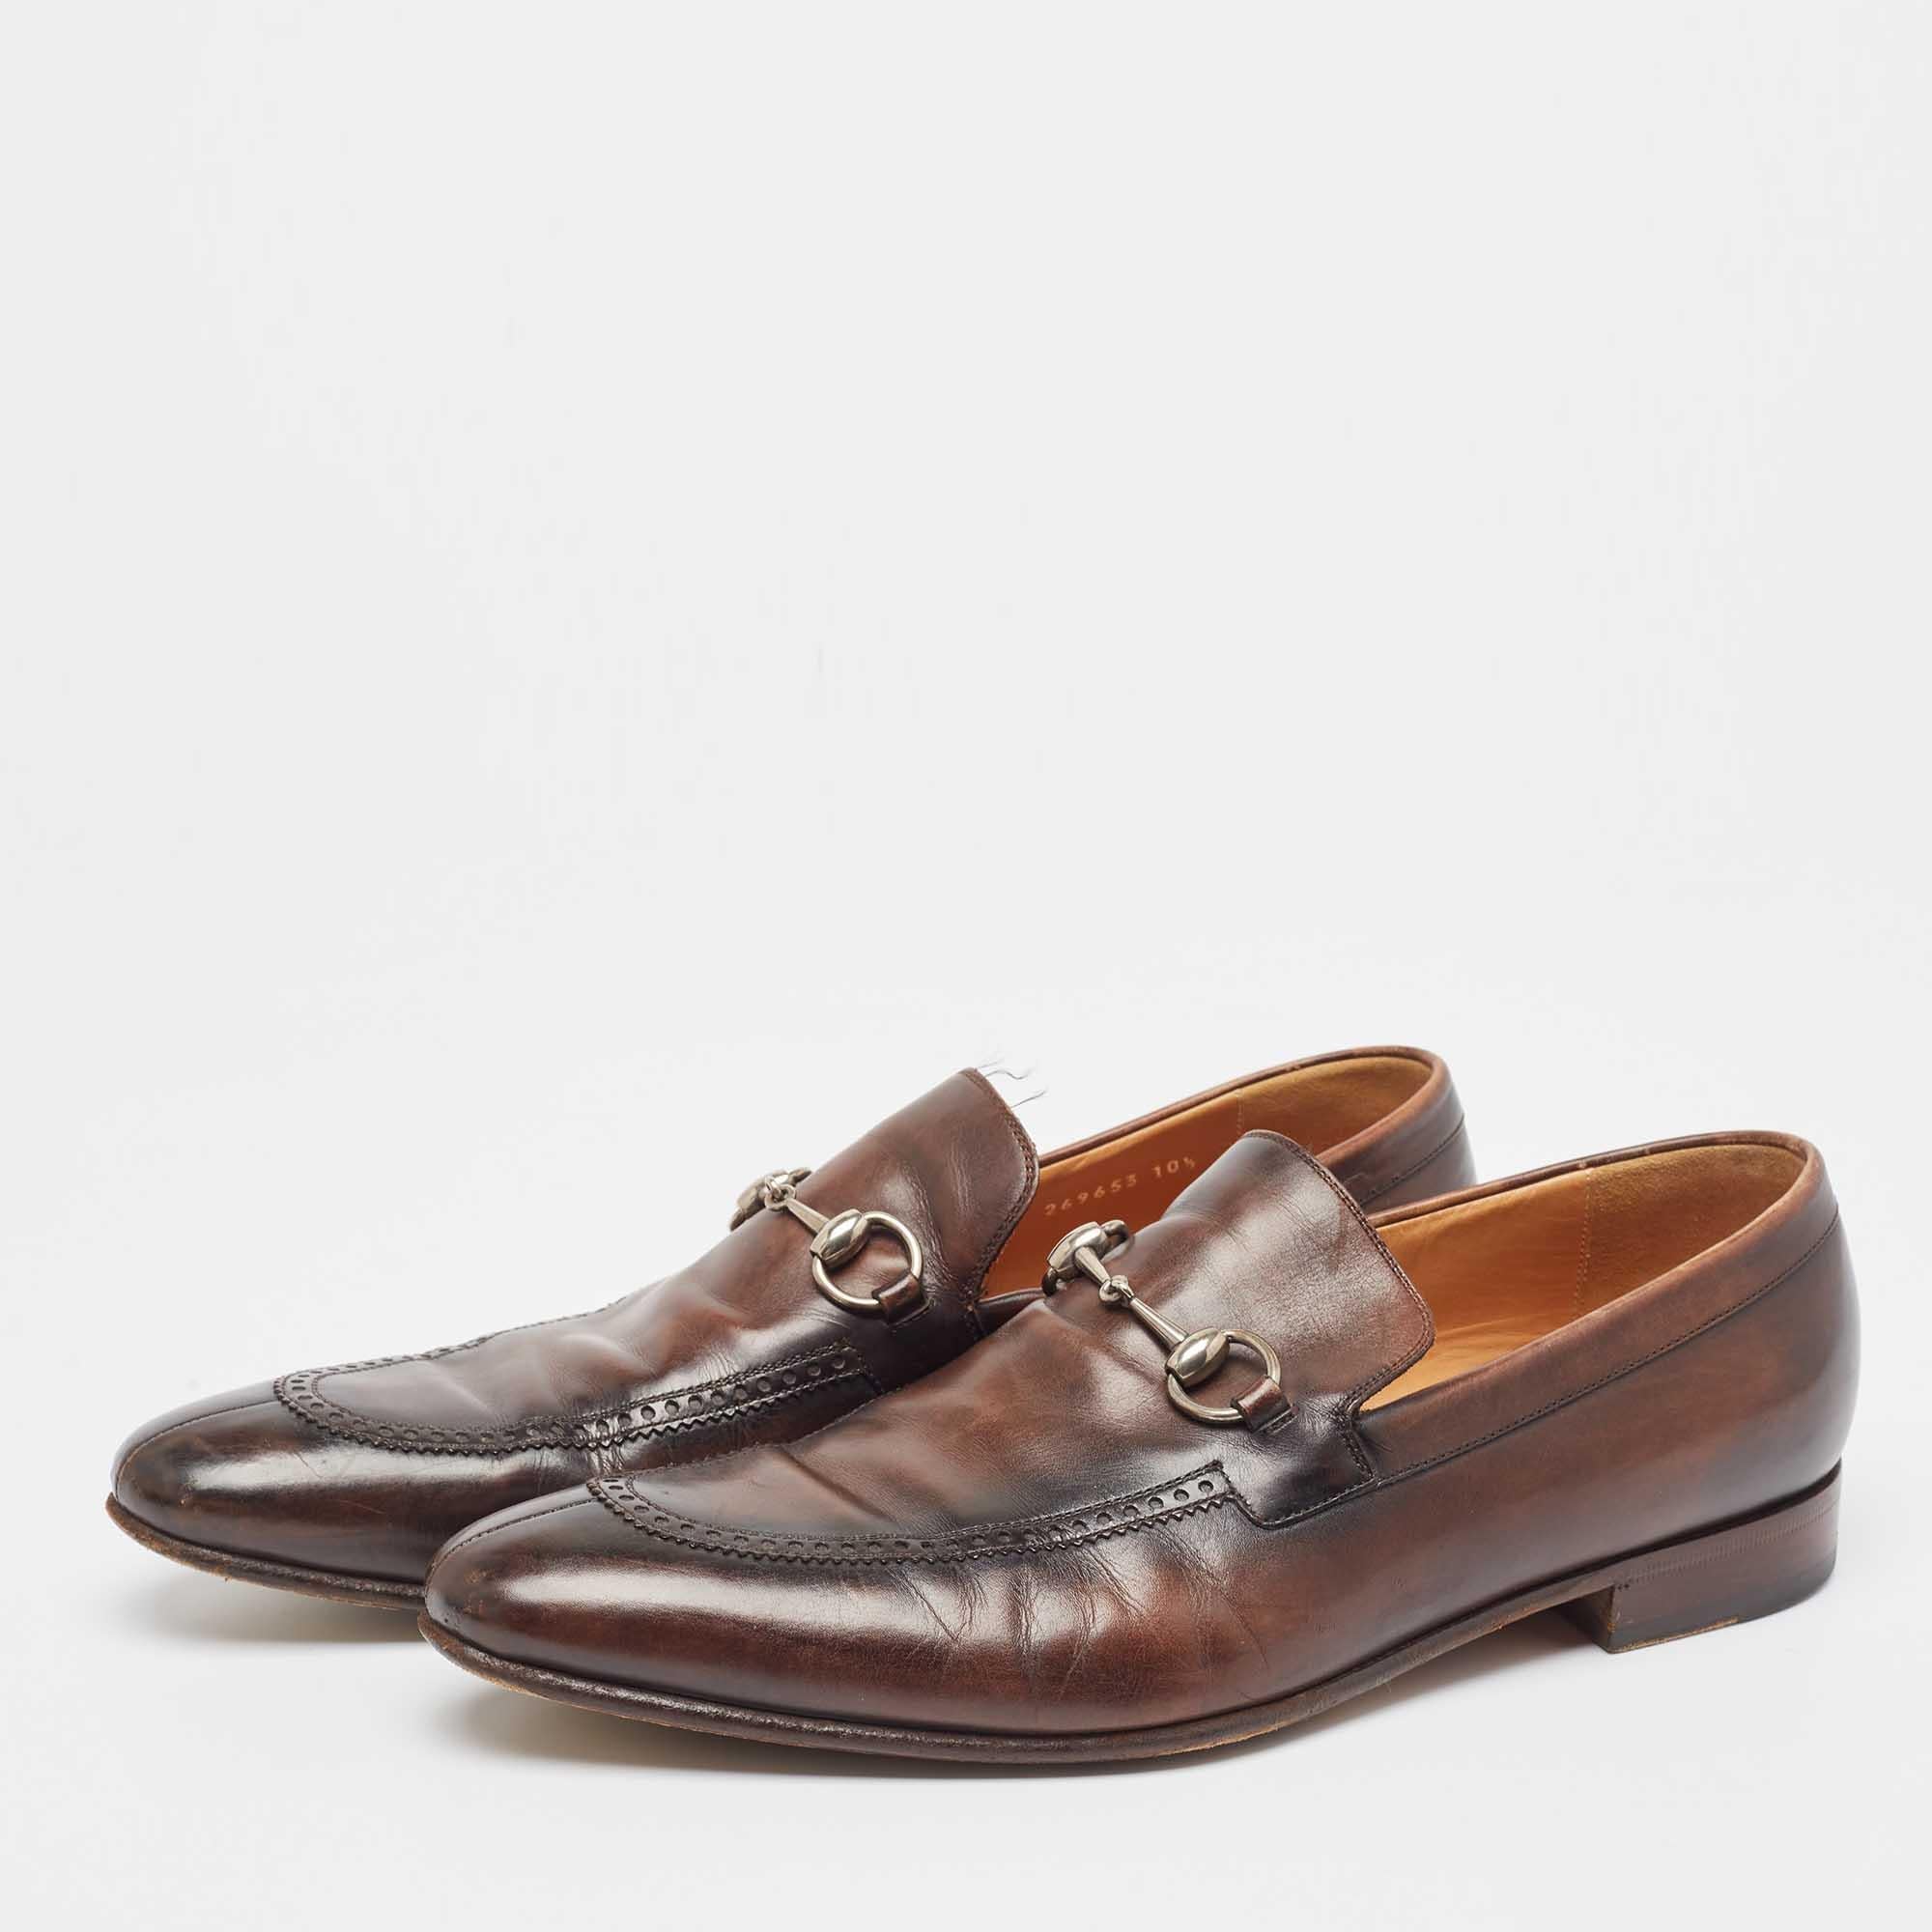 Gucci Brown Leather Horsebit Loafers Size 44.5 For Sale 5